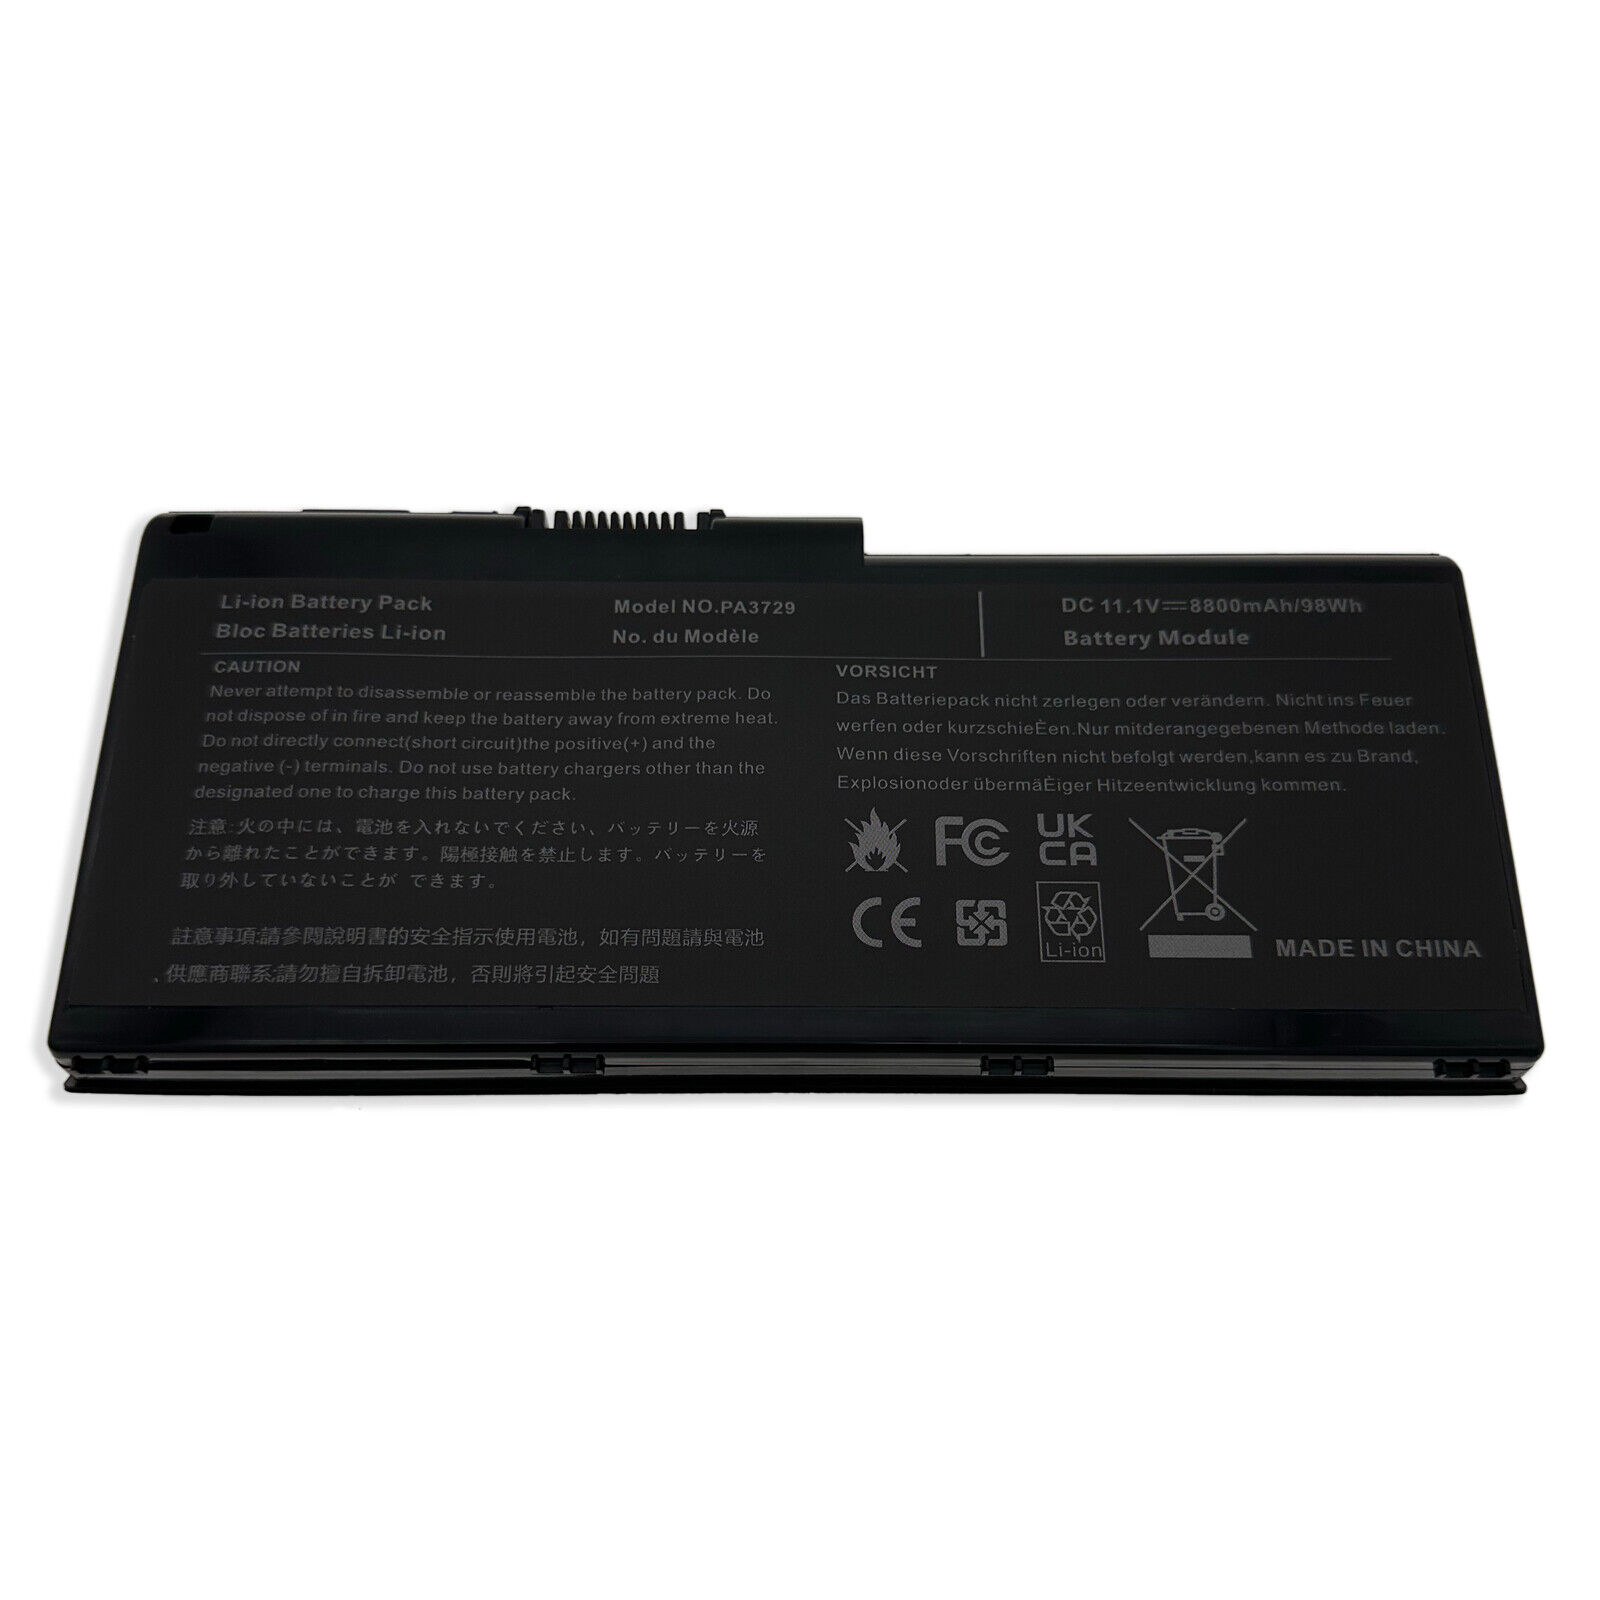 New 12Cell Laptop Battery For Toshiba Satellite P505-S8941 P505-S8940 P505-S8025